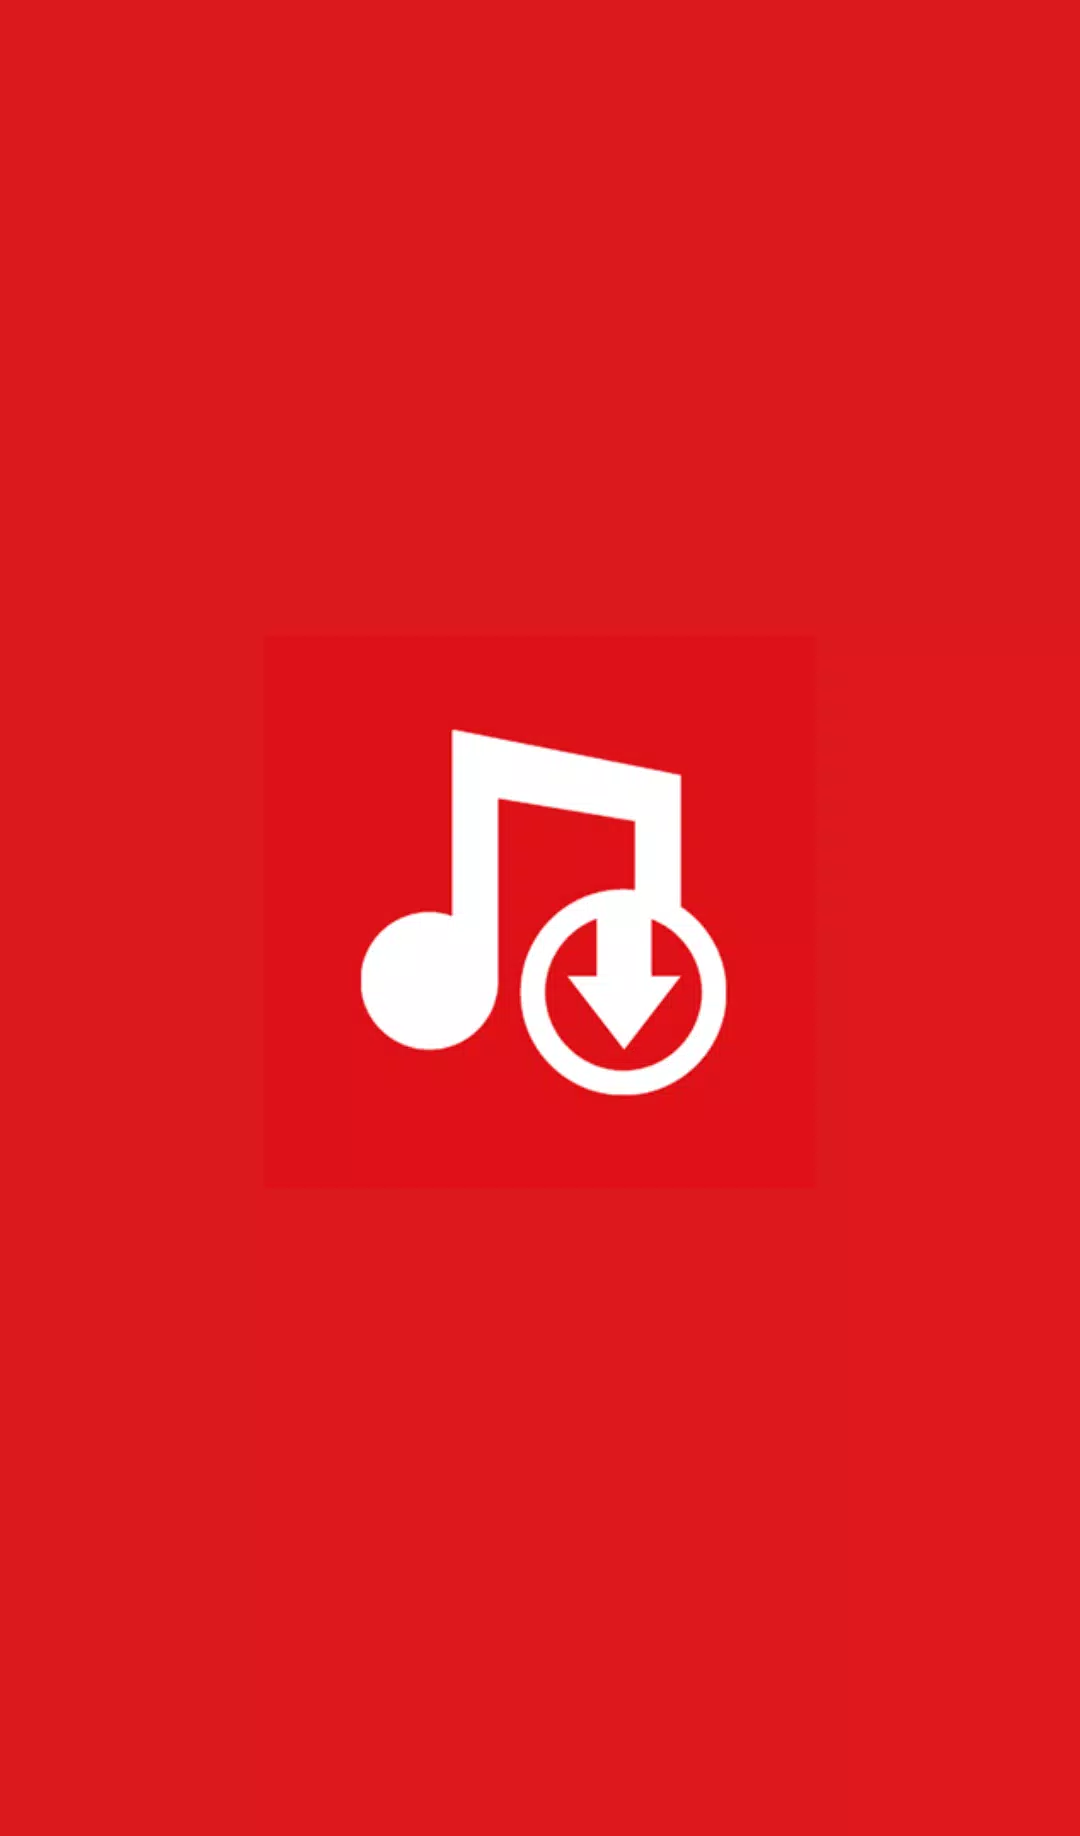 Y2 Mp3 Download Free Music APK for Android Download